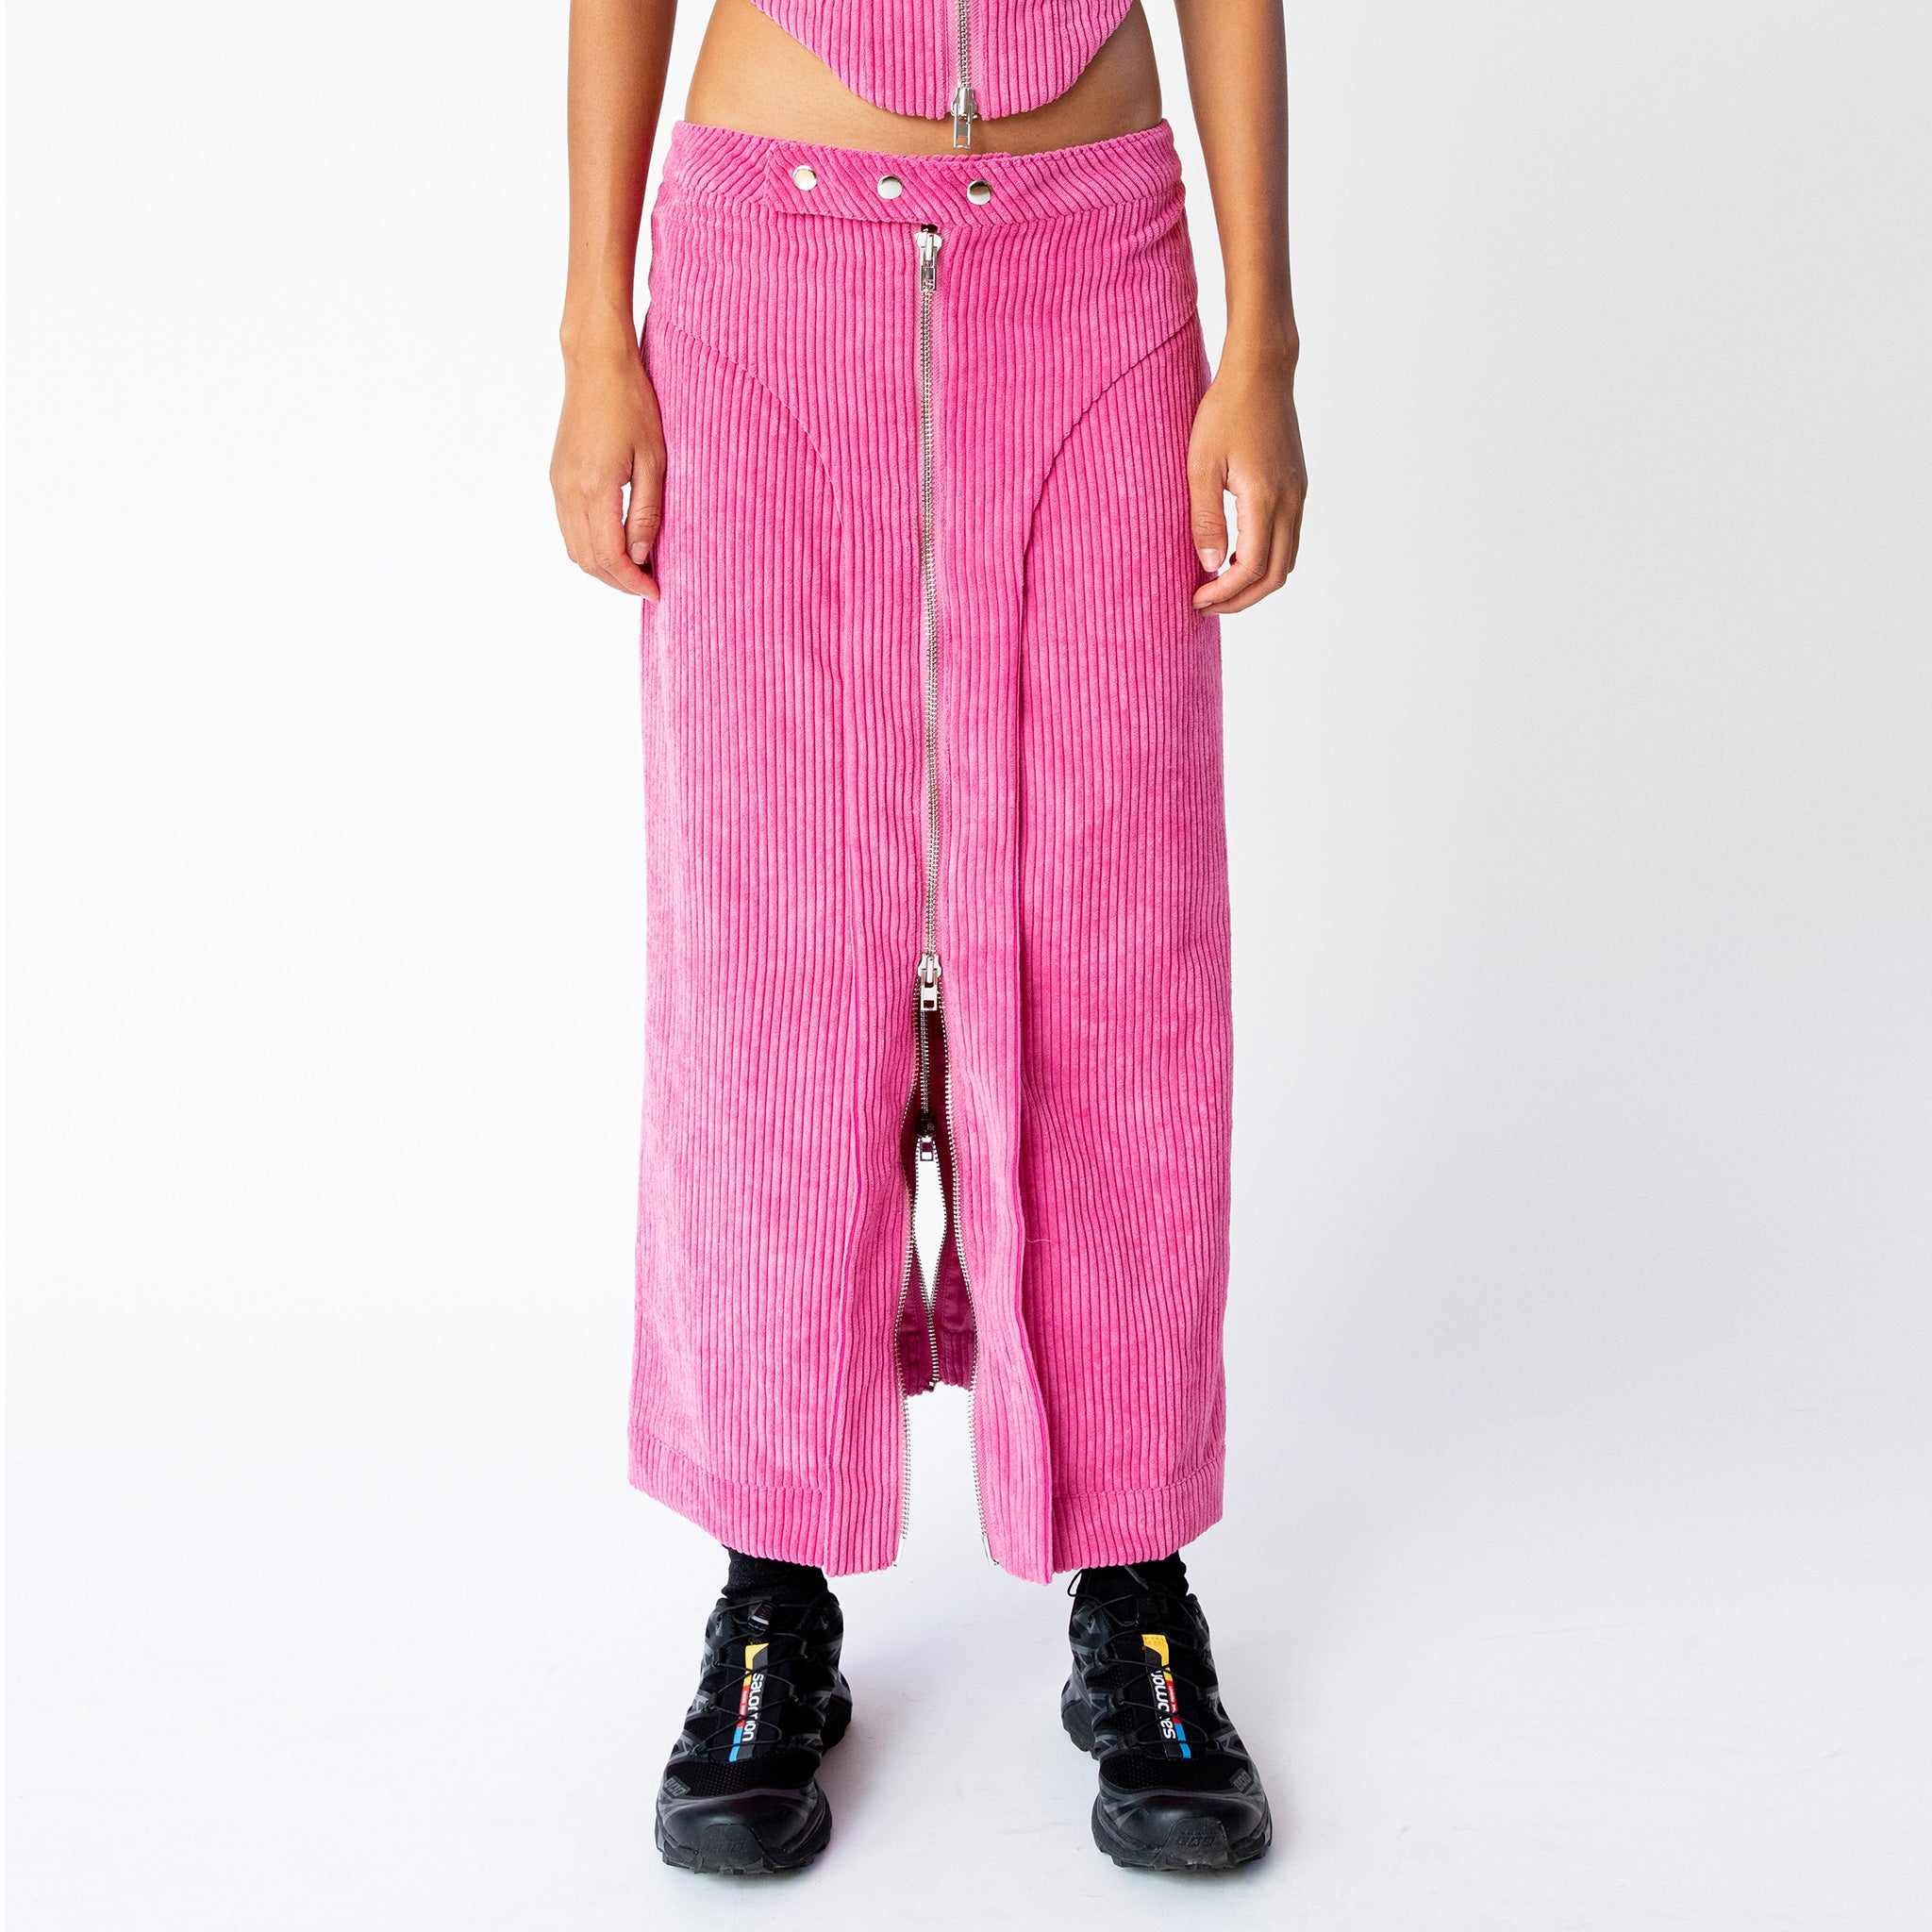 A model wears the full length pink corduroy Cord Zip Skirt by Eckhaus Latta, with full length silver front zipper and 3 front waistband button snaps, paired here with black sneakers.